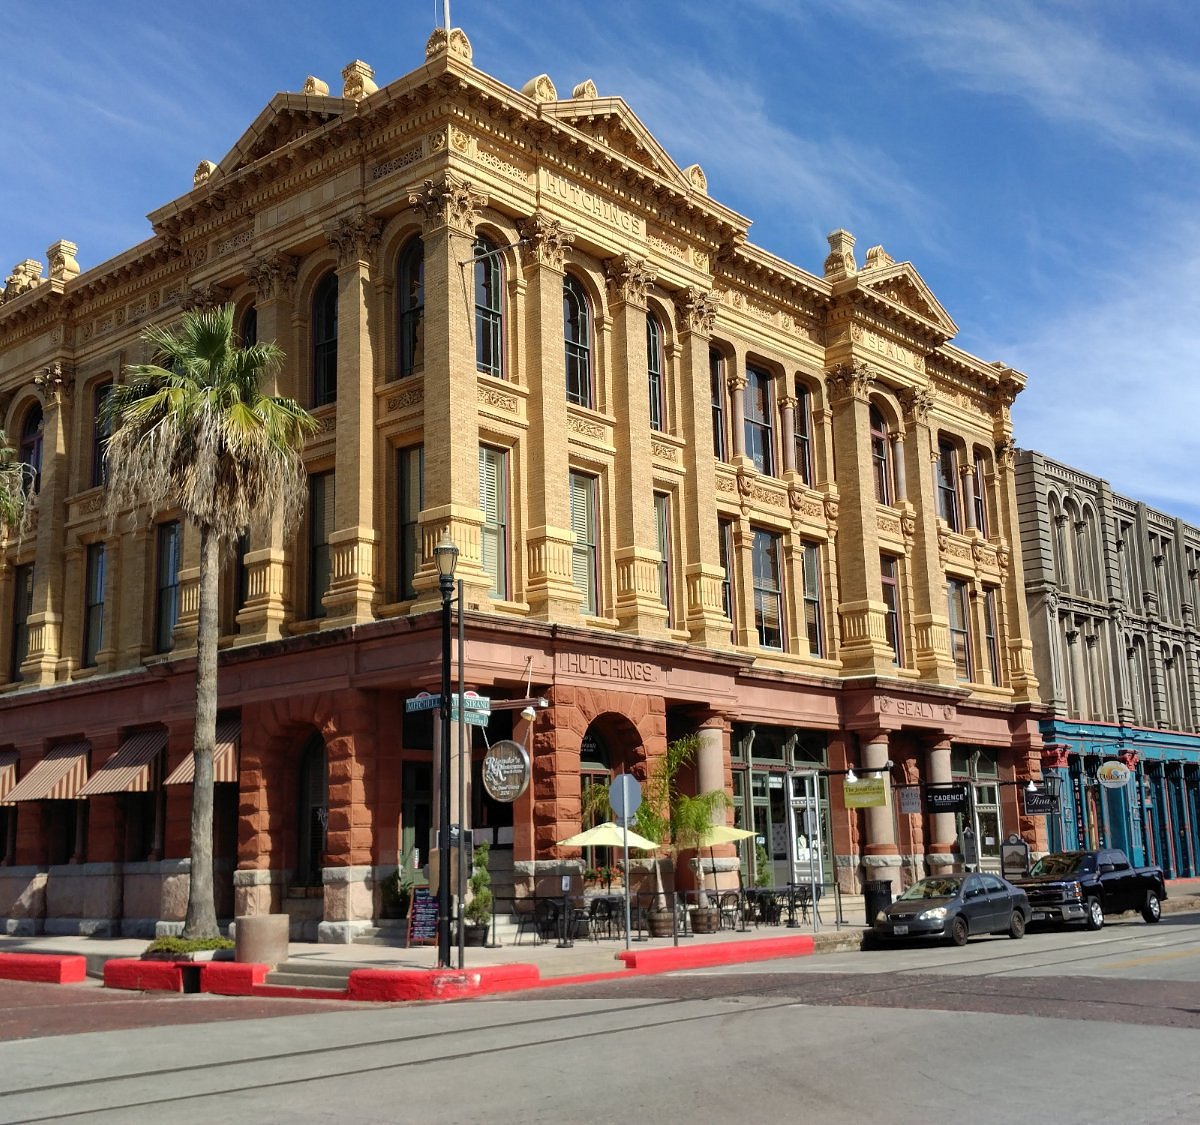 What's Up In Downtown Galveston? - Galveston Real Estate Team